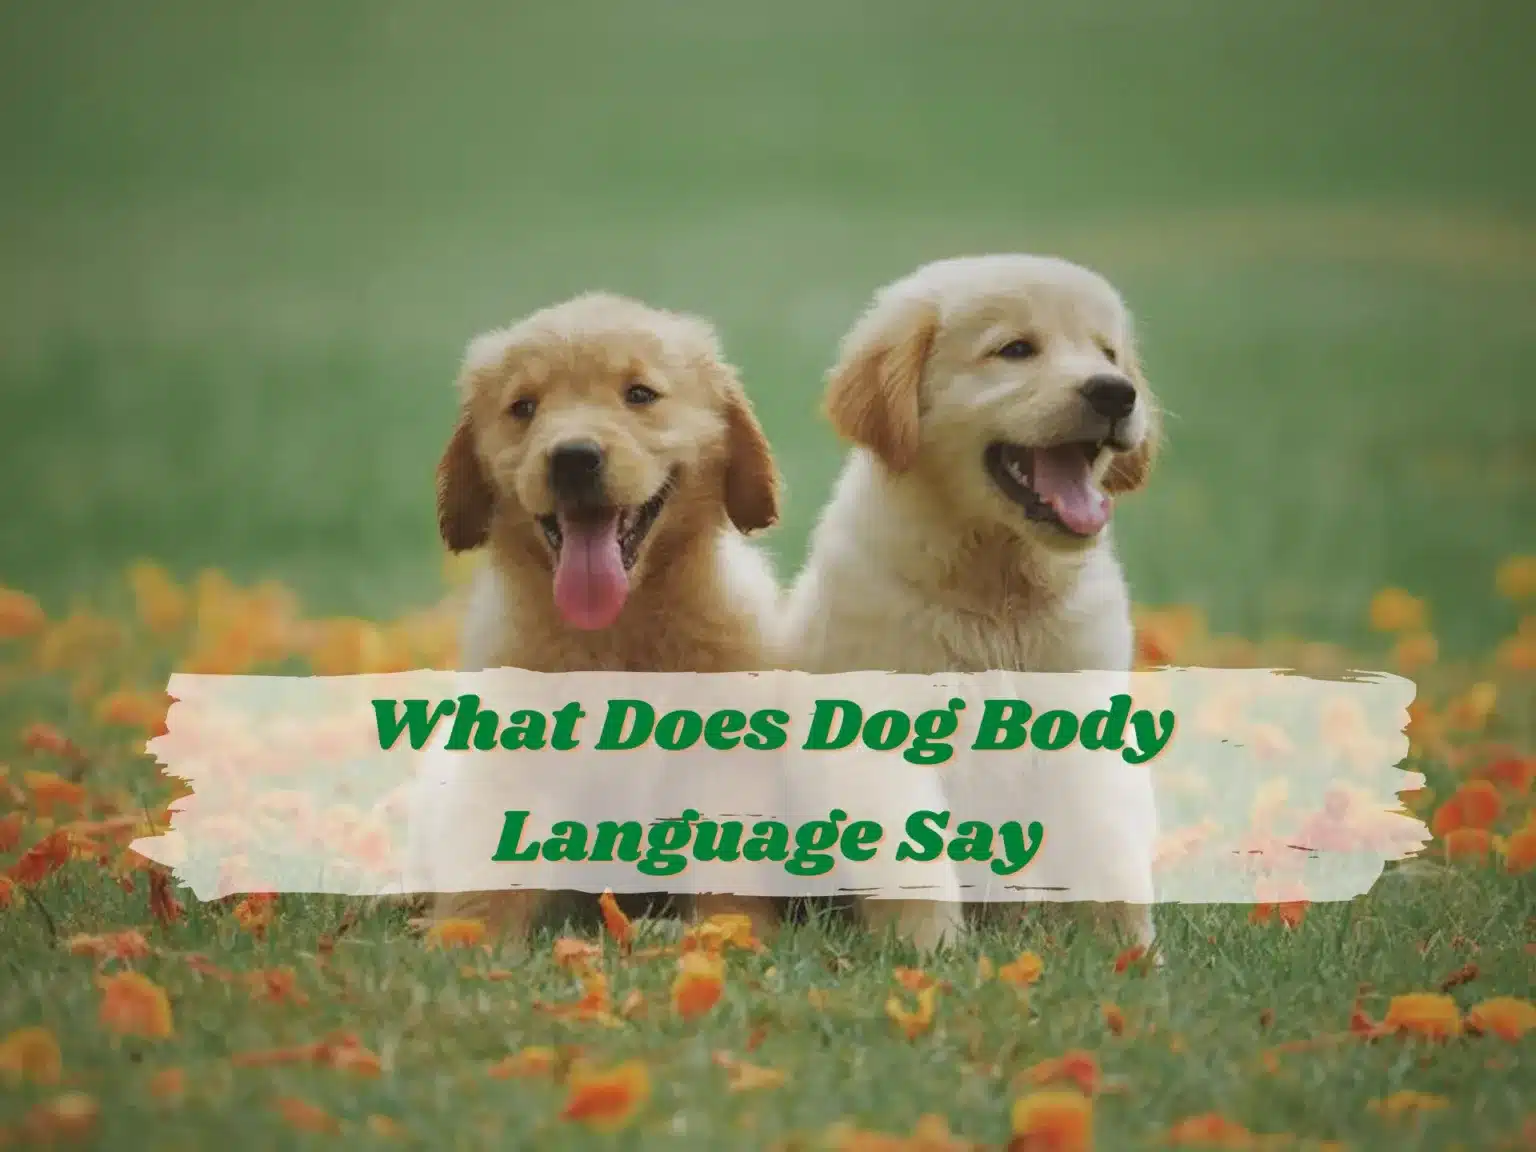 What Does Dog Body Language Say